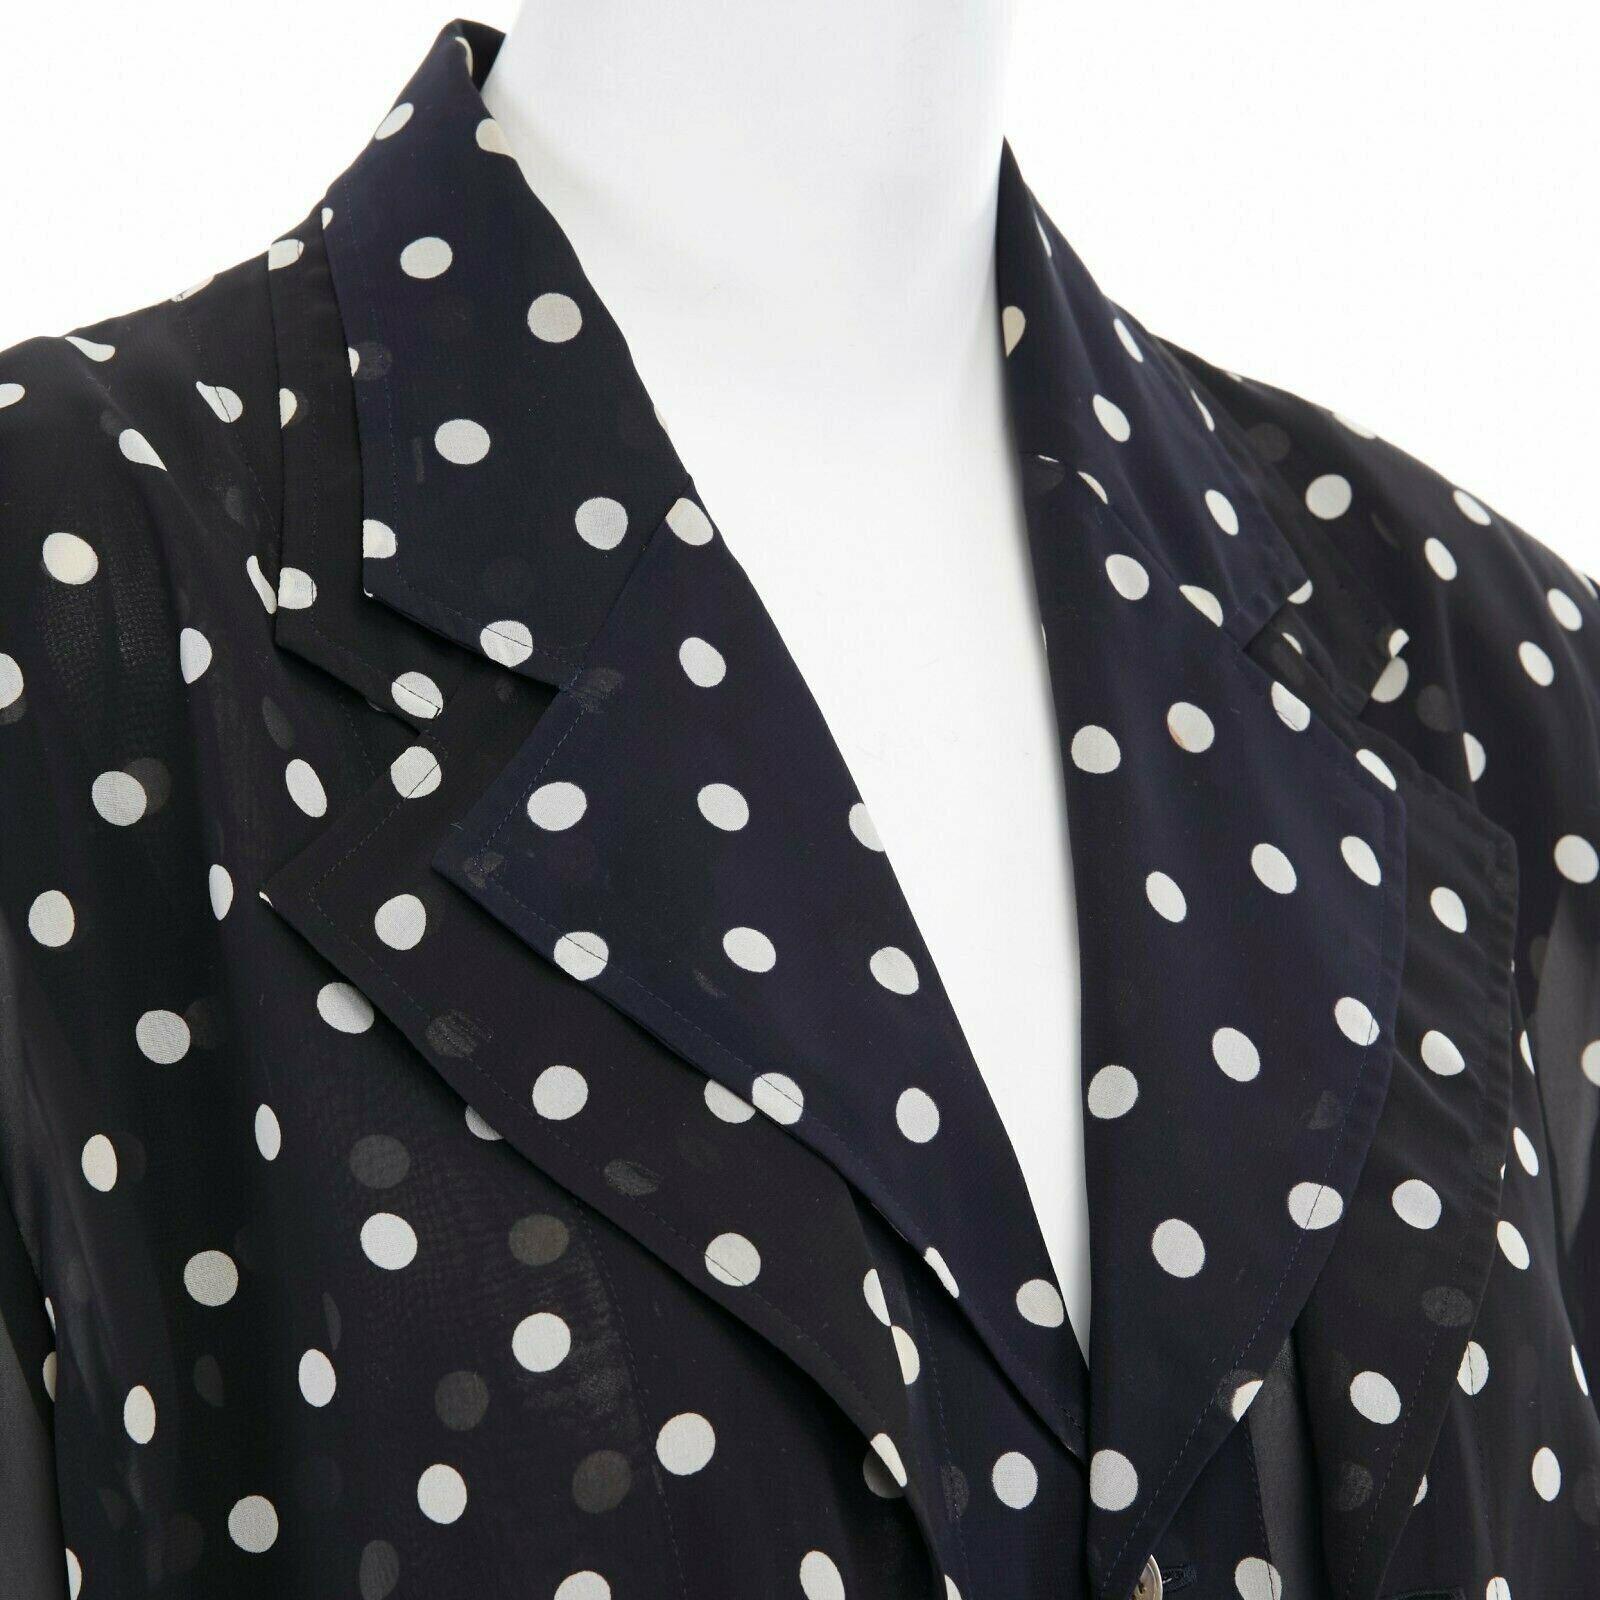 COMME DES GARCONS 1988 black navy polka dot dual layer draped front blazer S
Reference: TGAS/A01157
Brand: Comme Des Garcons
Designer: Rei Kawakubo
Material: Polyester
Color: Black
Pattern: Polka Dot
Made in: Japan

CONDITION:
Condition: Excellent,